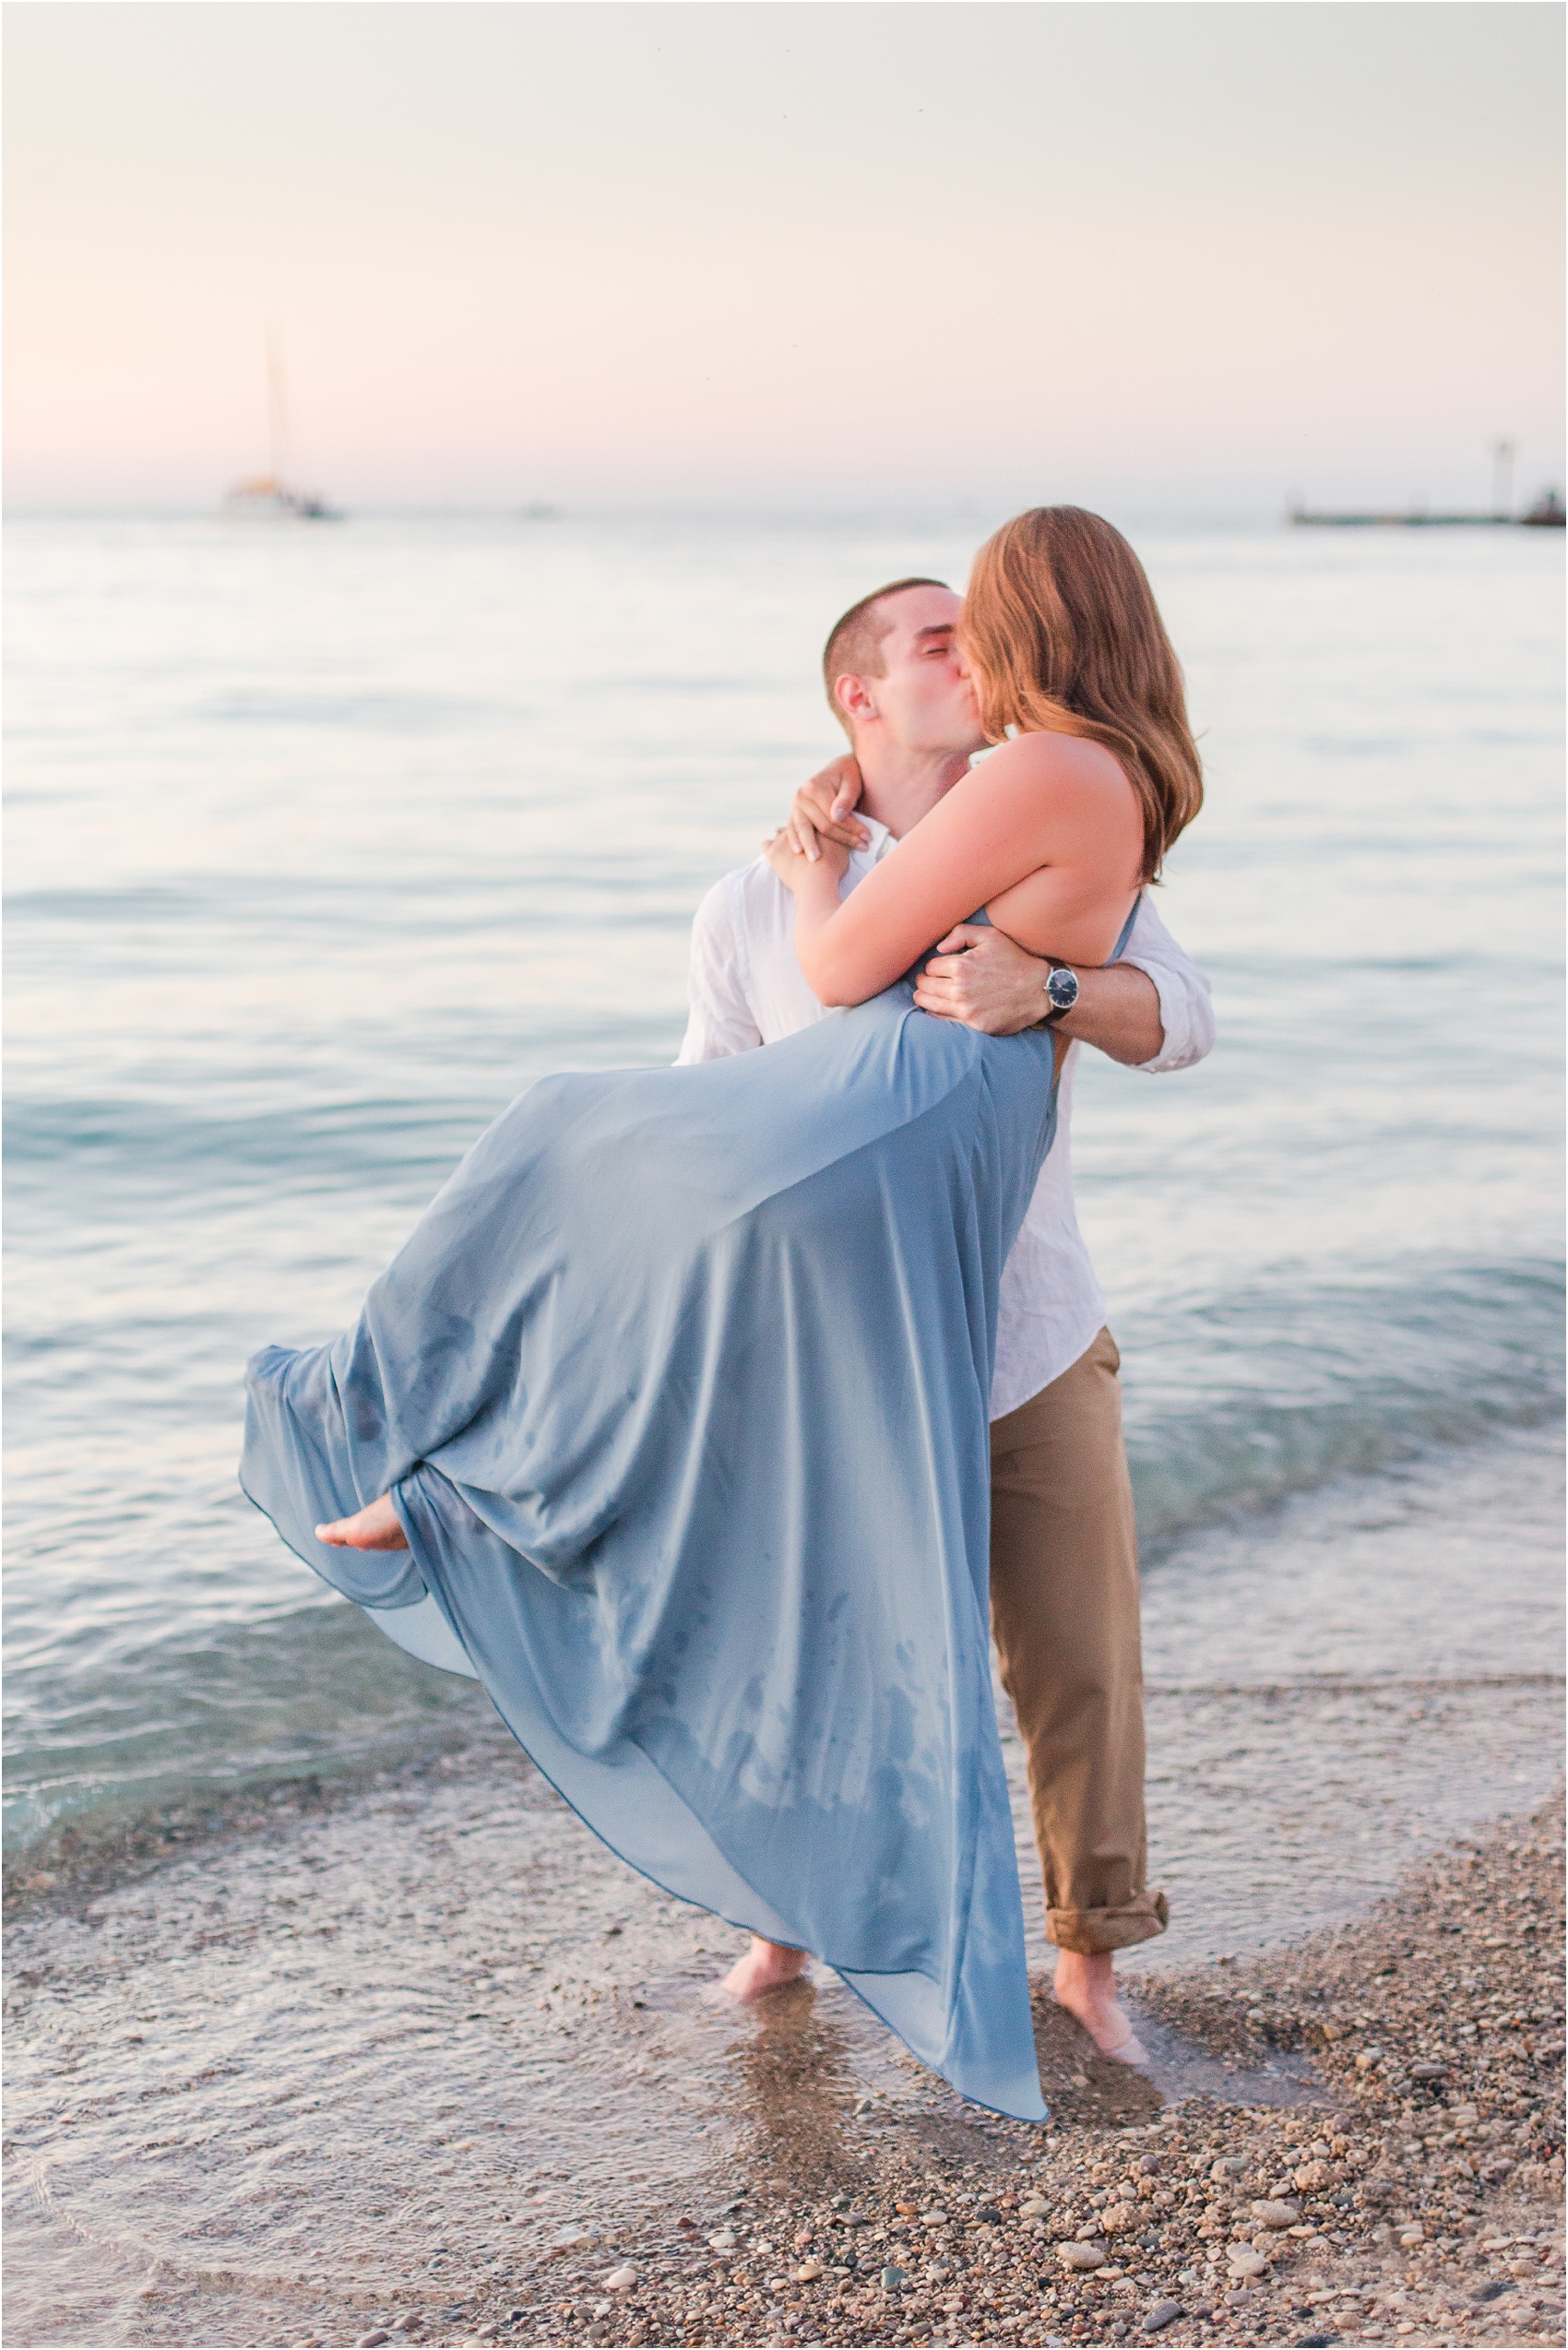 romantic-sunset-engagement-photos-at-michigan-beach-park-in-charlevoix-mi-by-courtney-carolyn-photography_0003.jpg